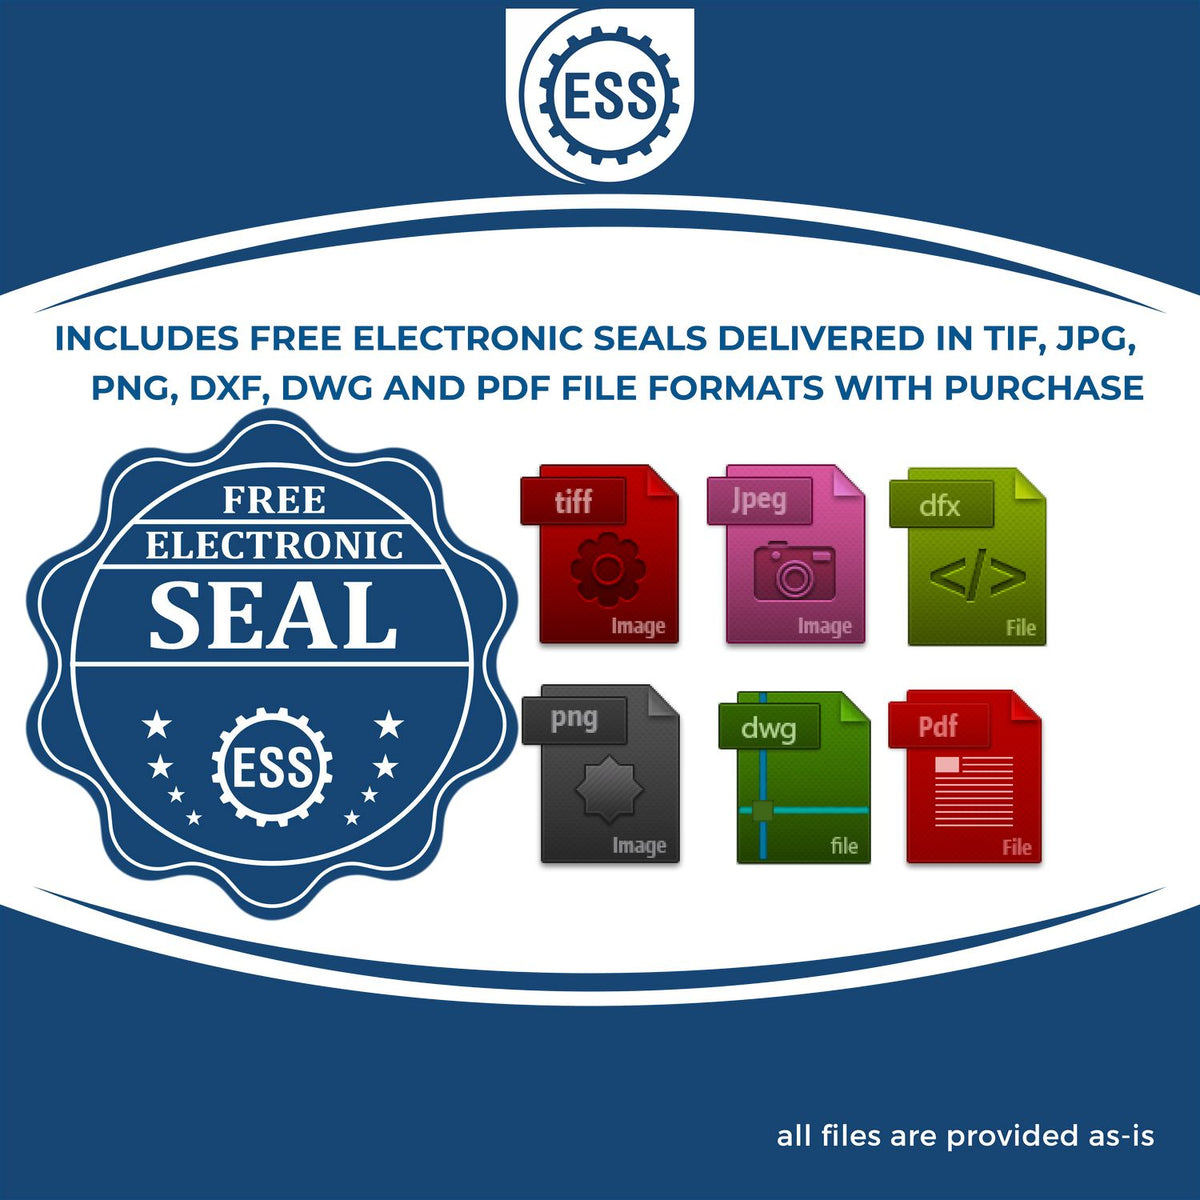 An infographic for the free electronic seal for the Pennsylvania Geologist Desk Seal illustrating the different file type icons such as DXF, DWG, TIF, JPG and PNG.